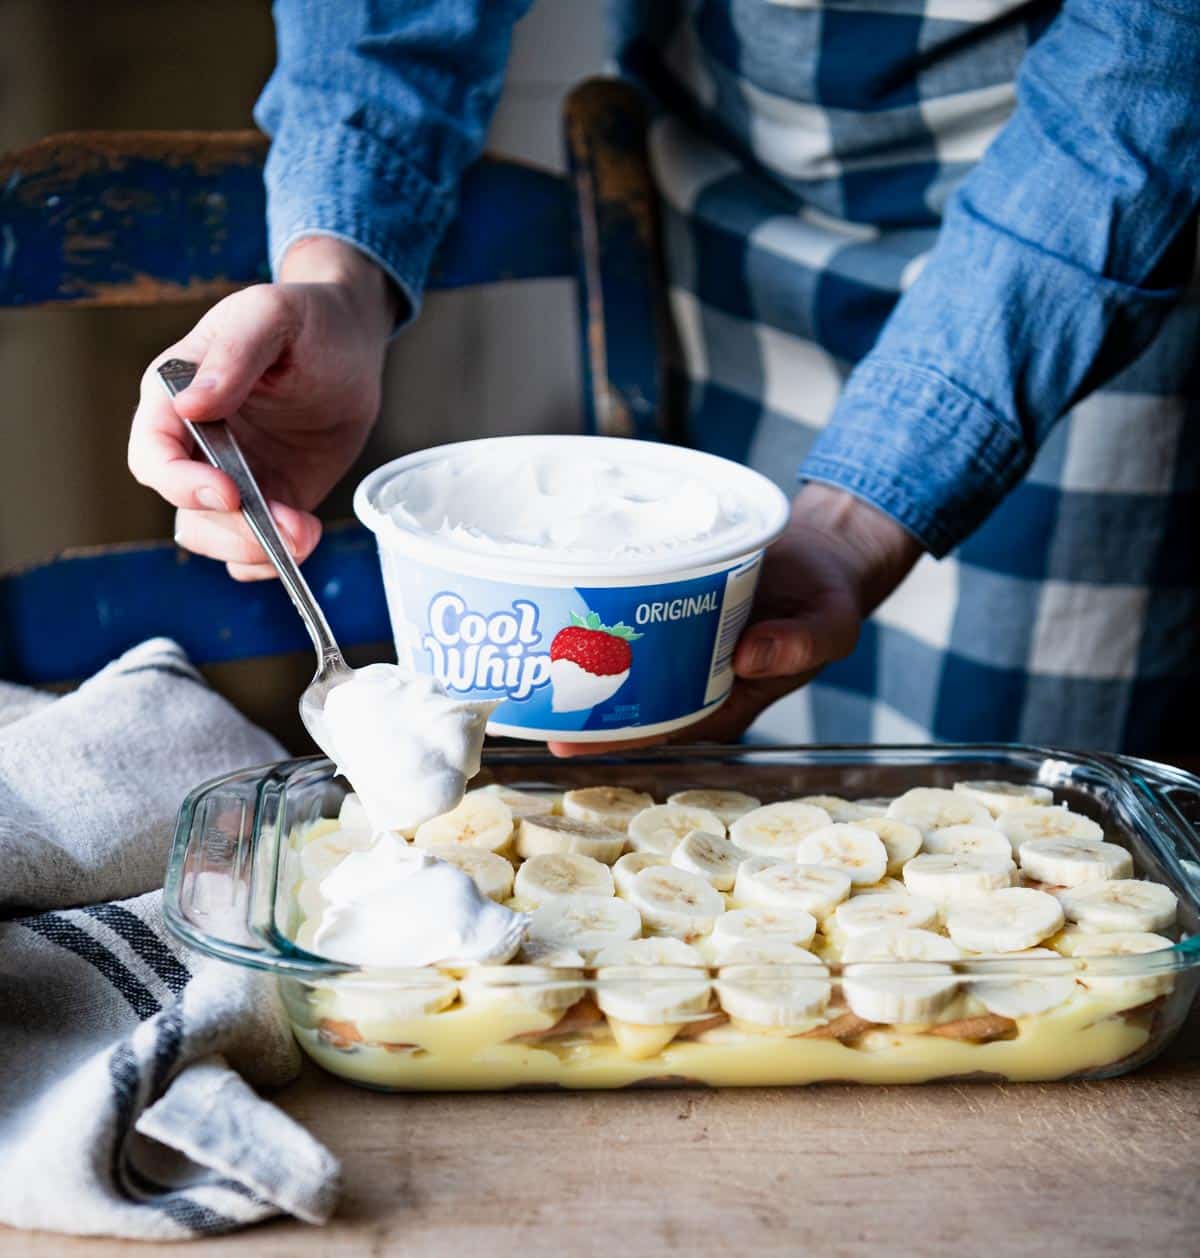 Spreading cool whip on top of banana pudding.